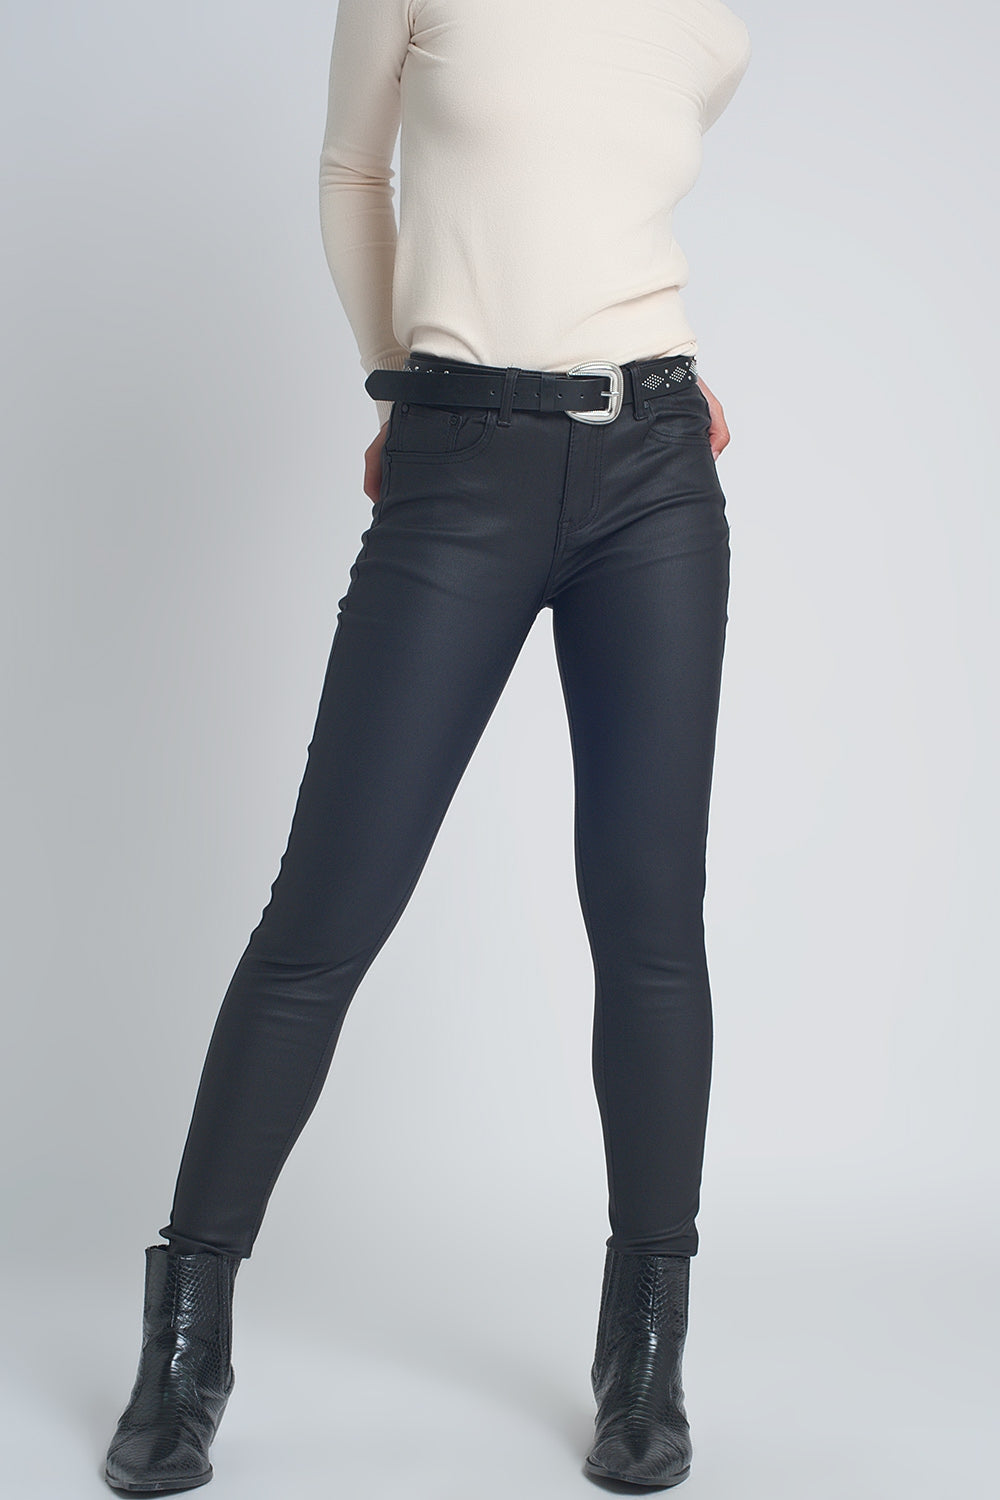 Faux leather skinny trousers in black colour